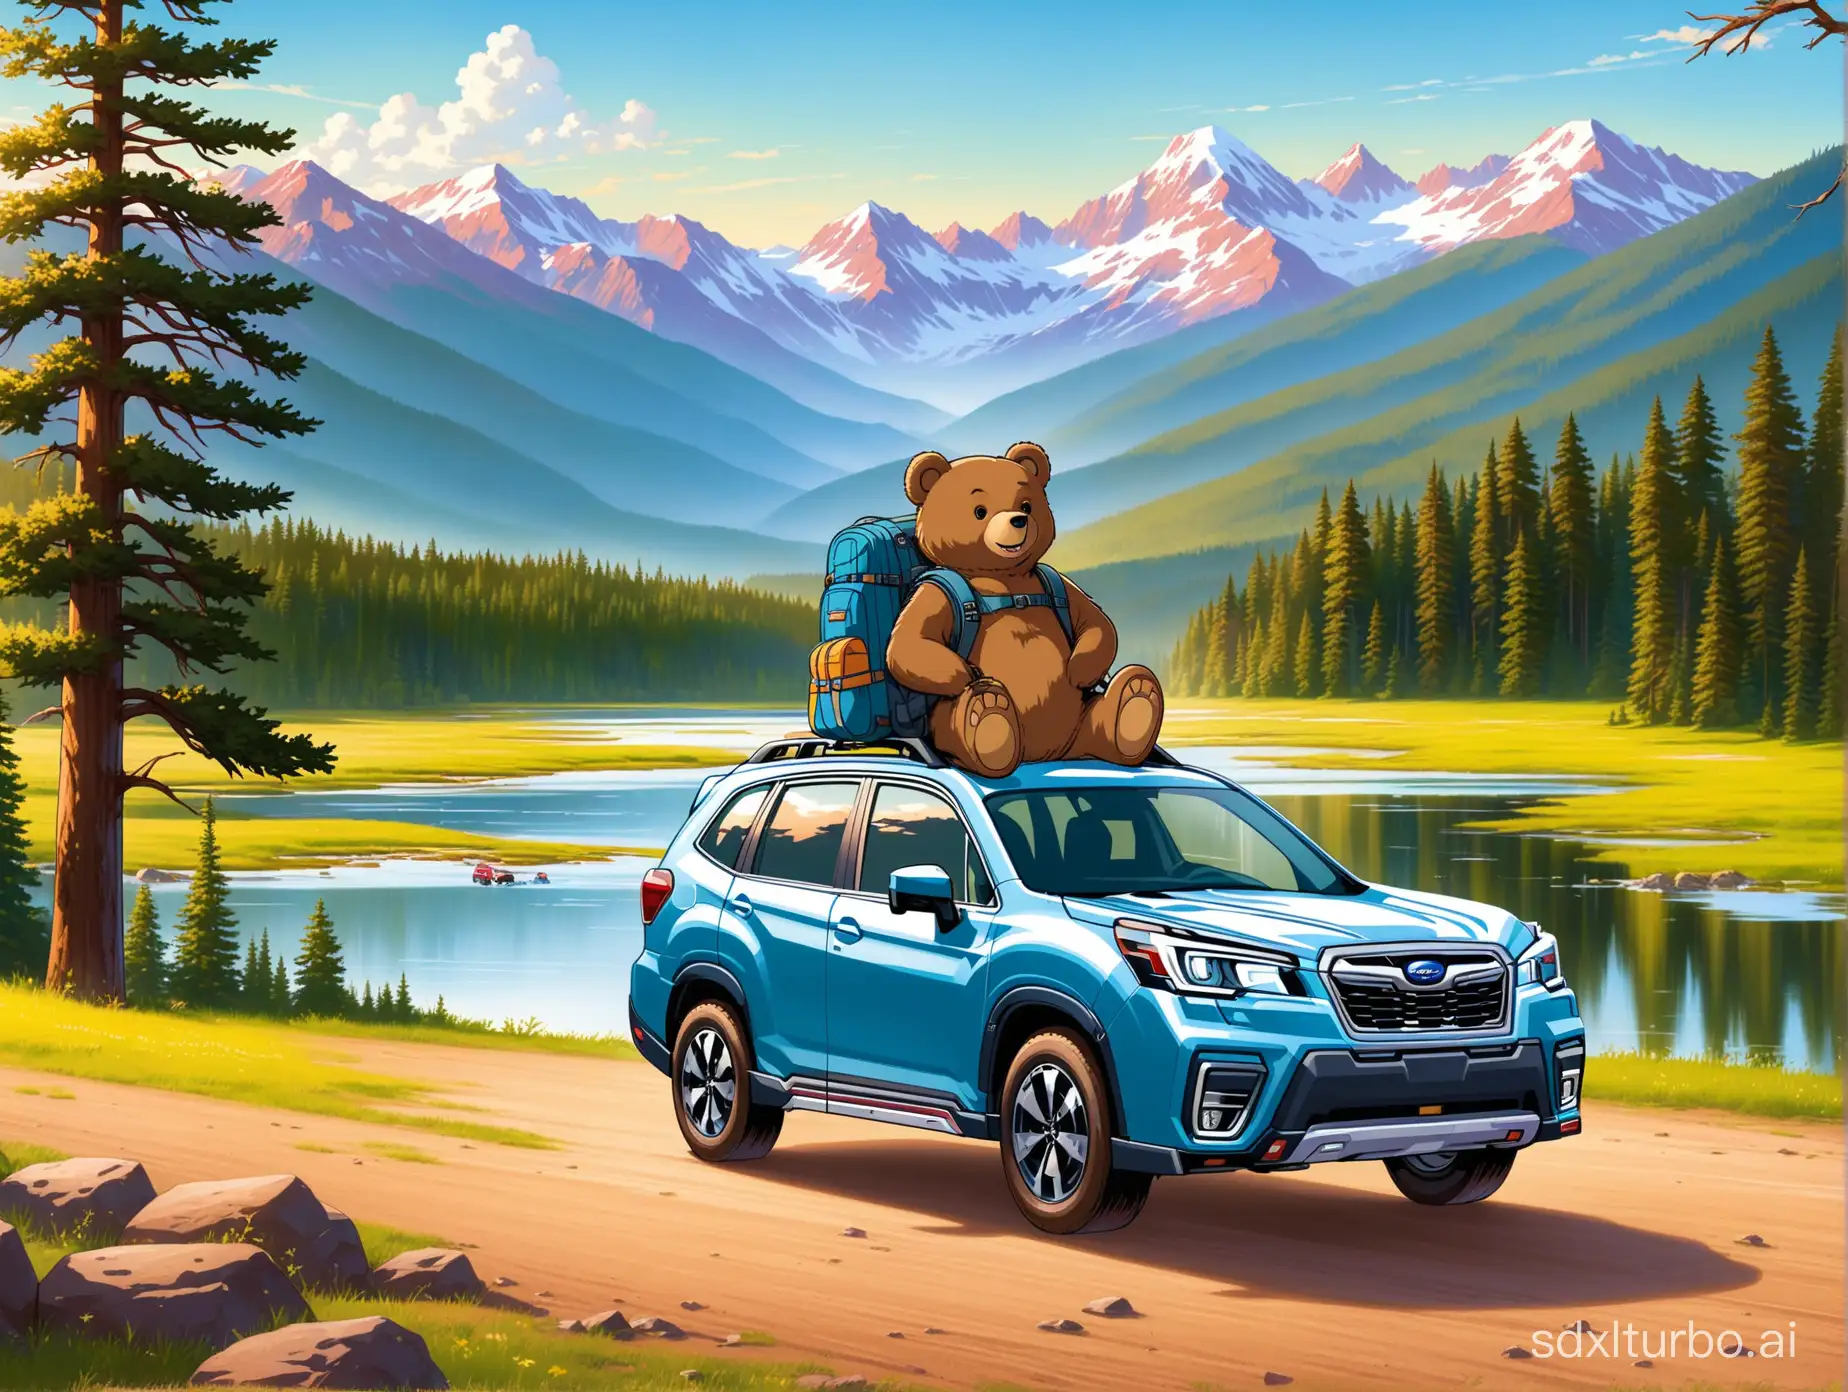 logo of a Mr. bear with backpack and travel gear behind a Subaru Forester car and in the background a landscape of the United States reflecting adventure